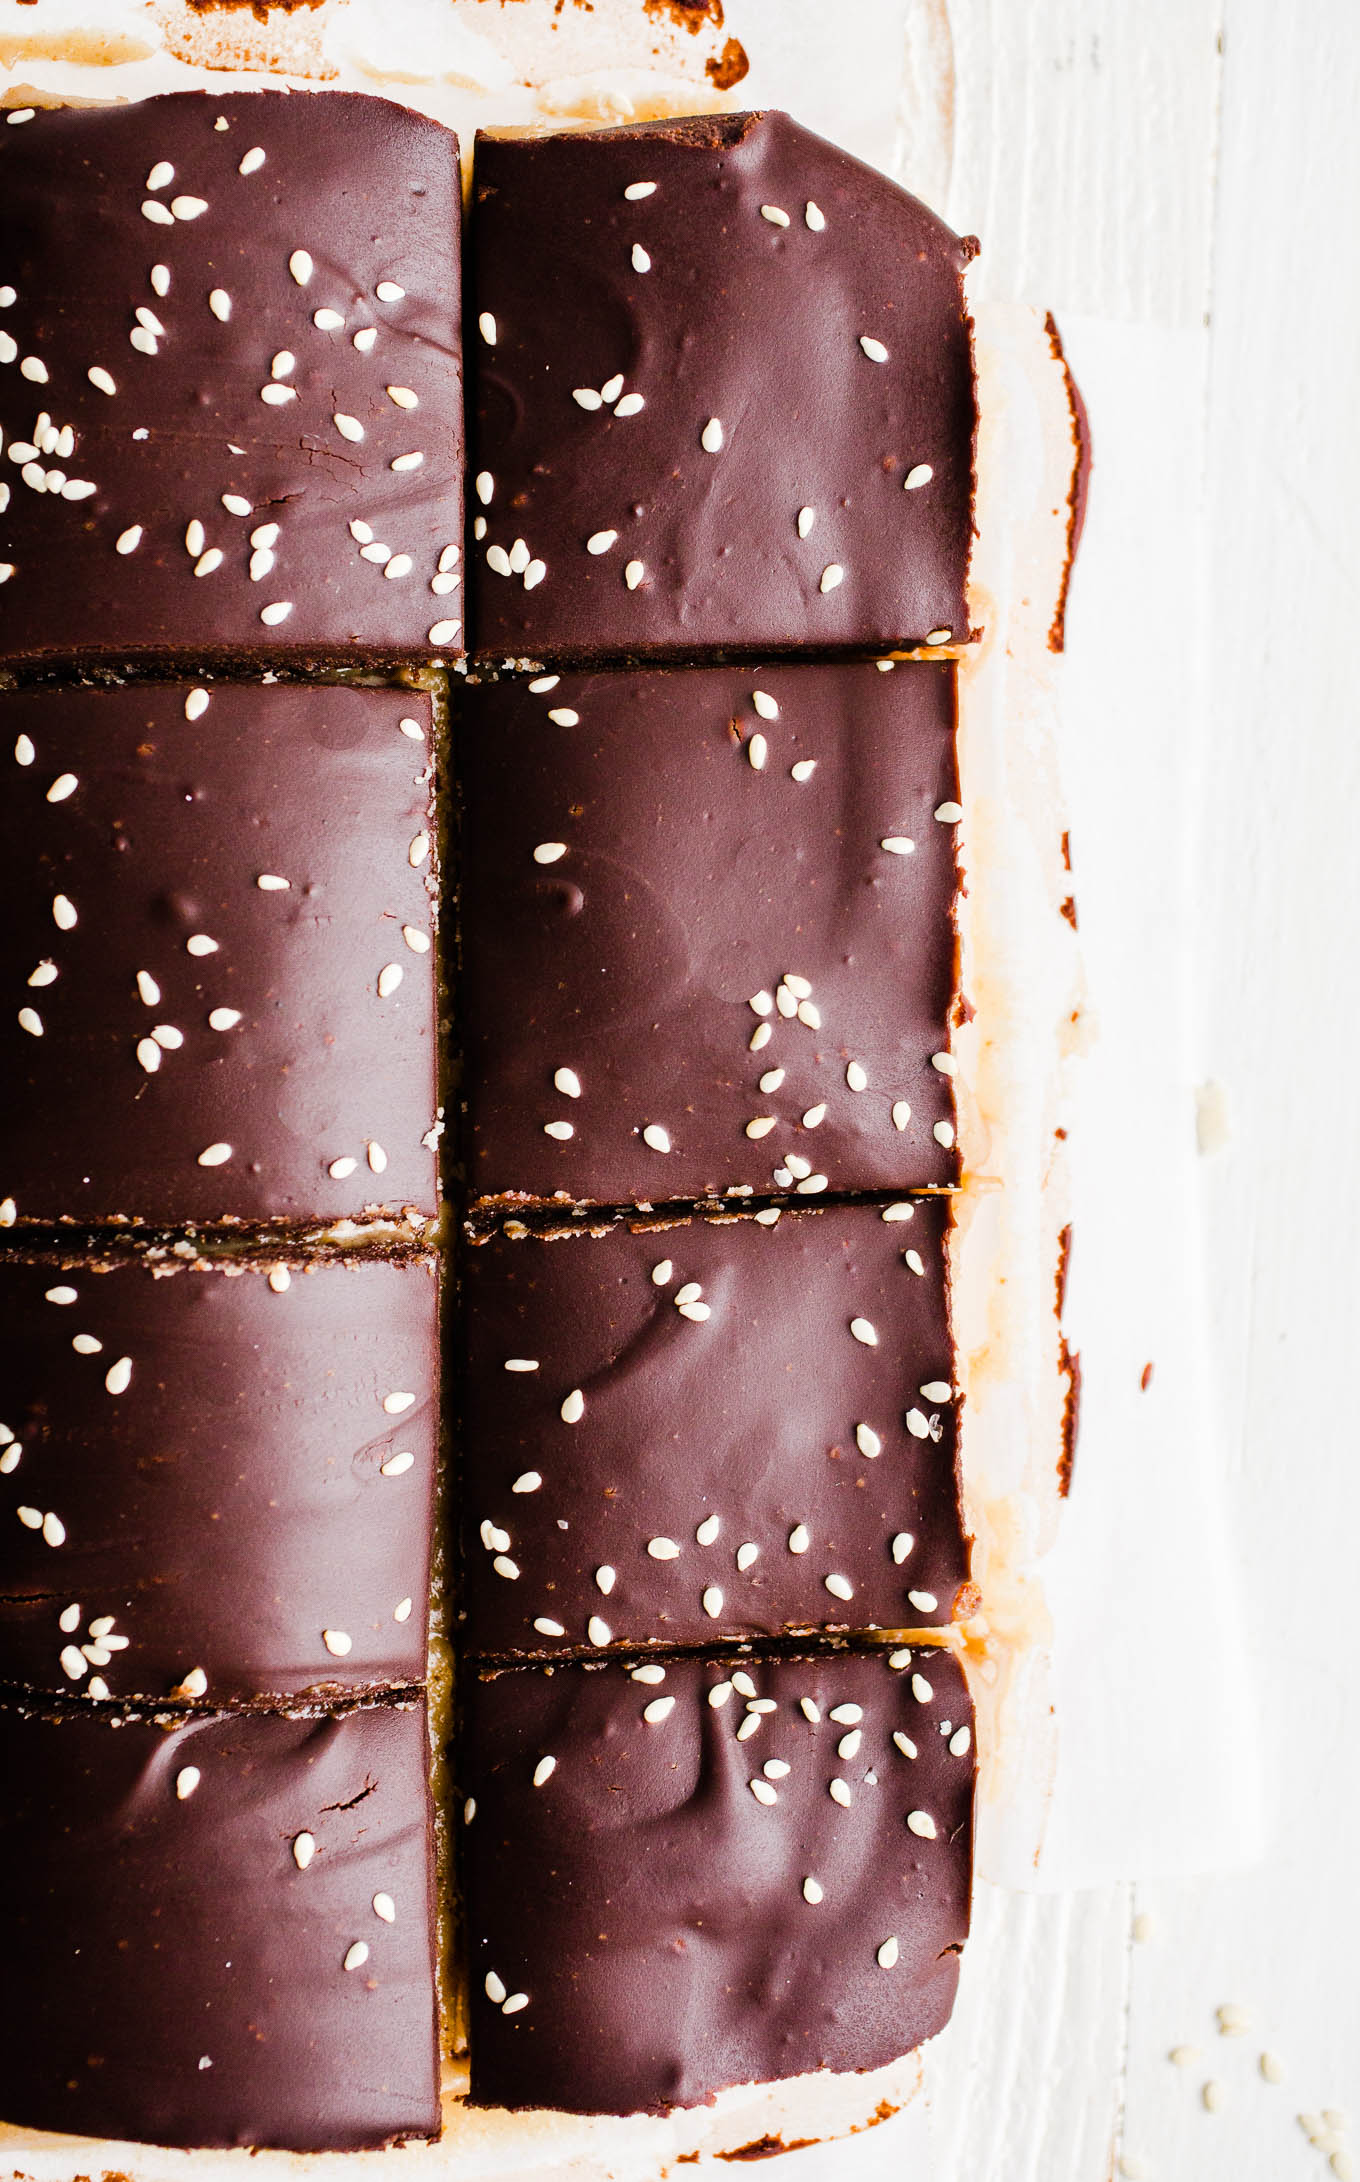 Dessert bars topped with chocolate and sesame seeds